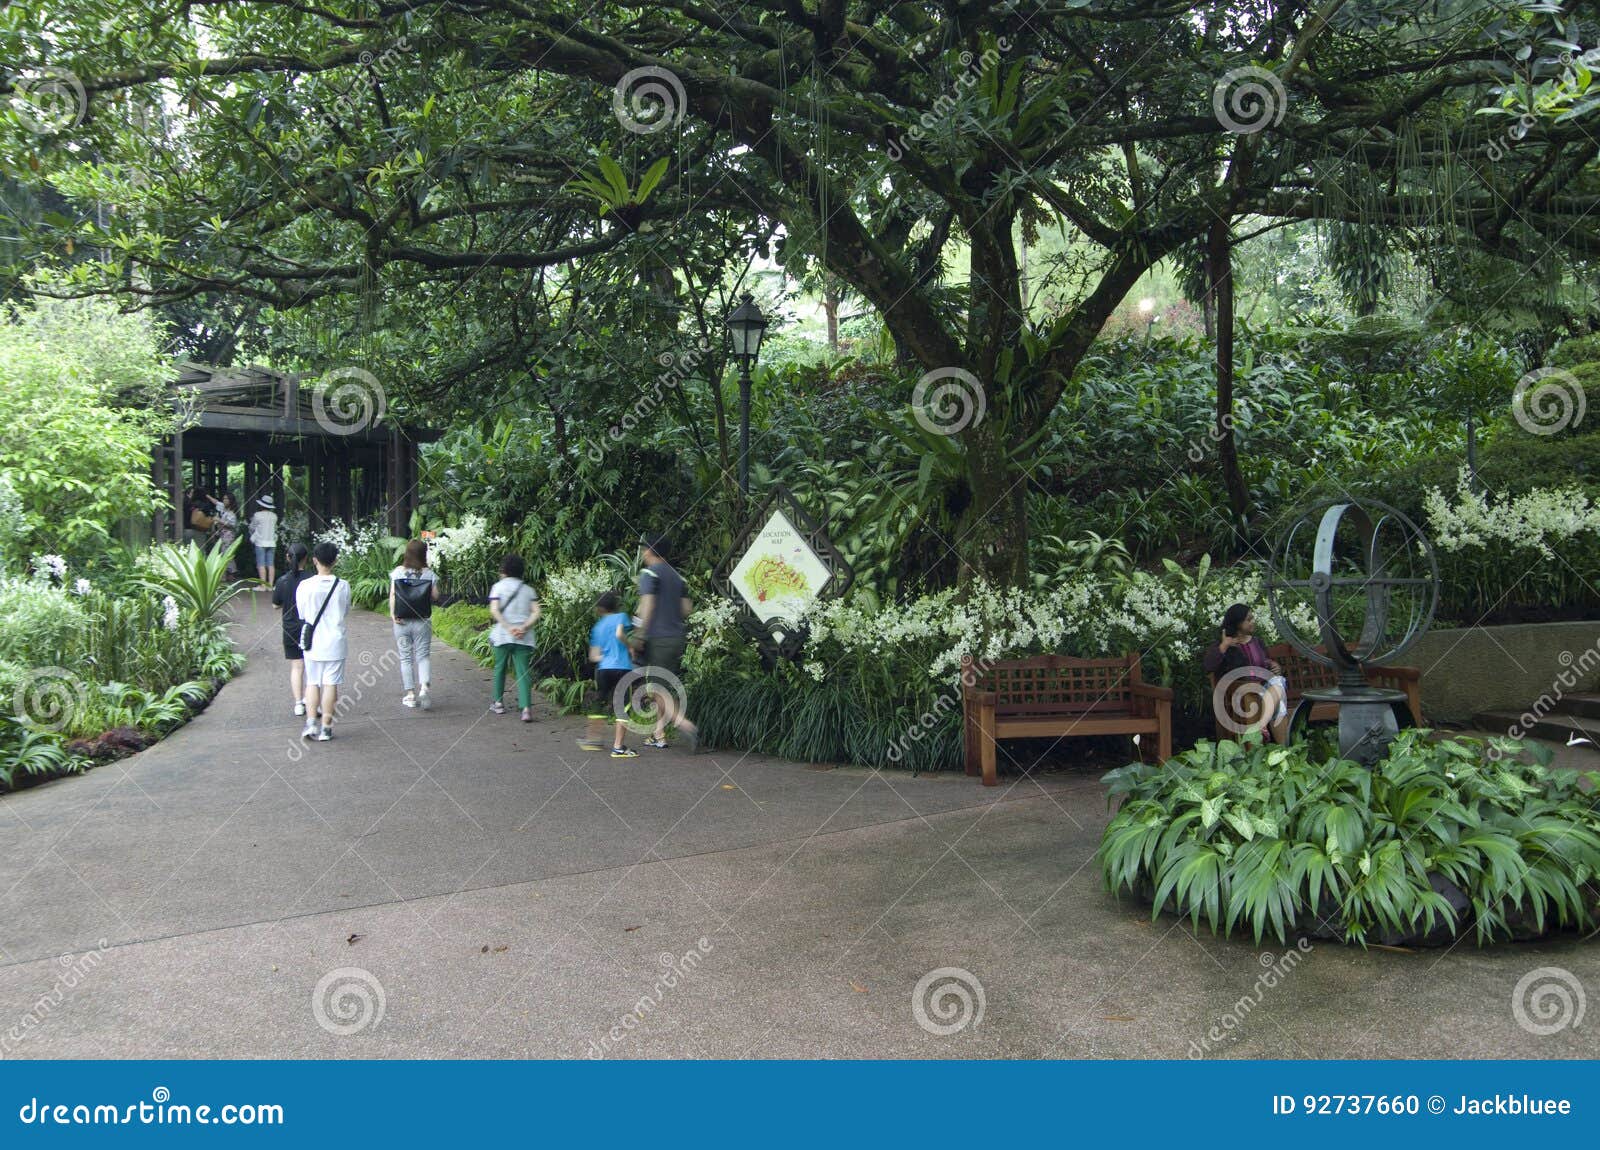 501 Botanical People Singapore Photos Free Royalty Free Stock Photos From Dreamstime